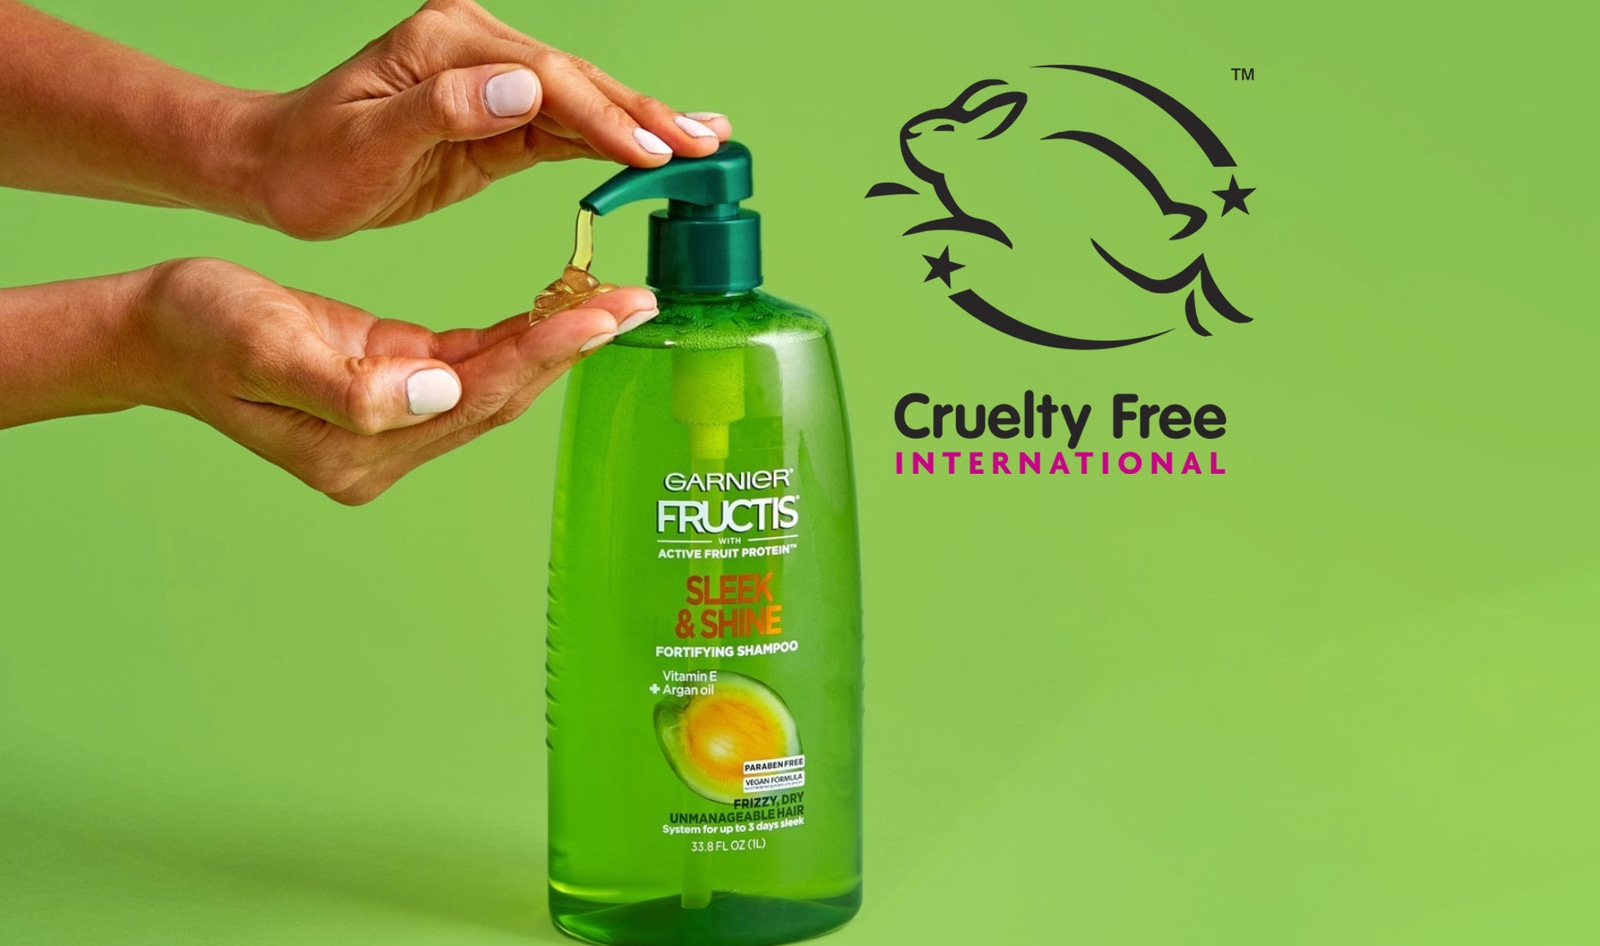 Garnier Products Are Now Officially Cruelty-Free